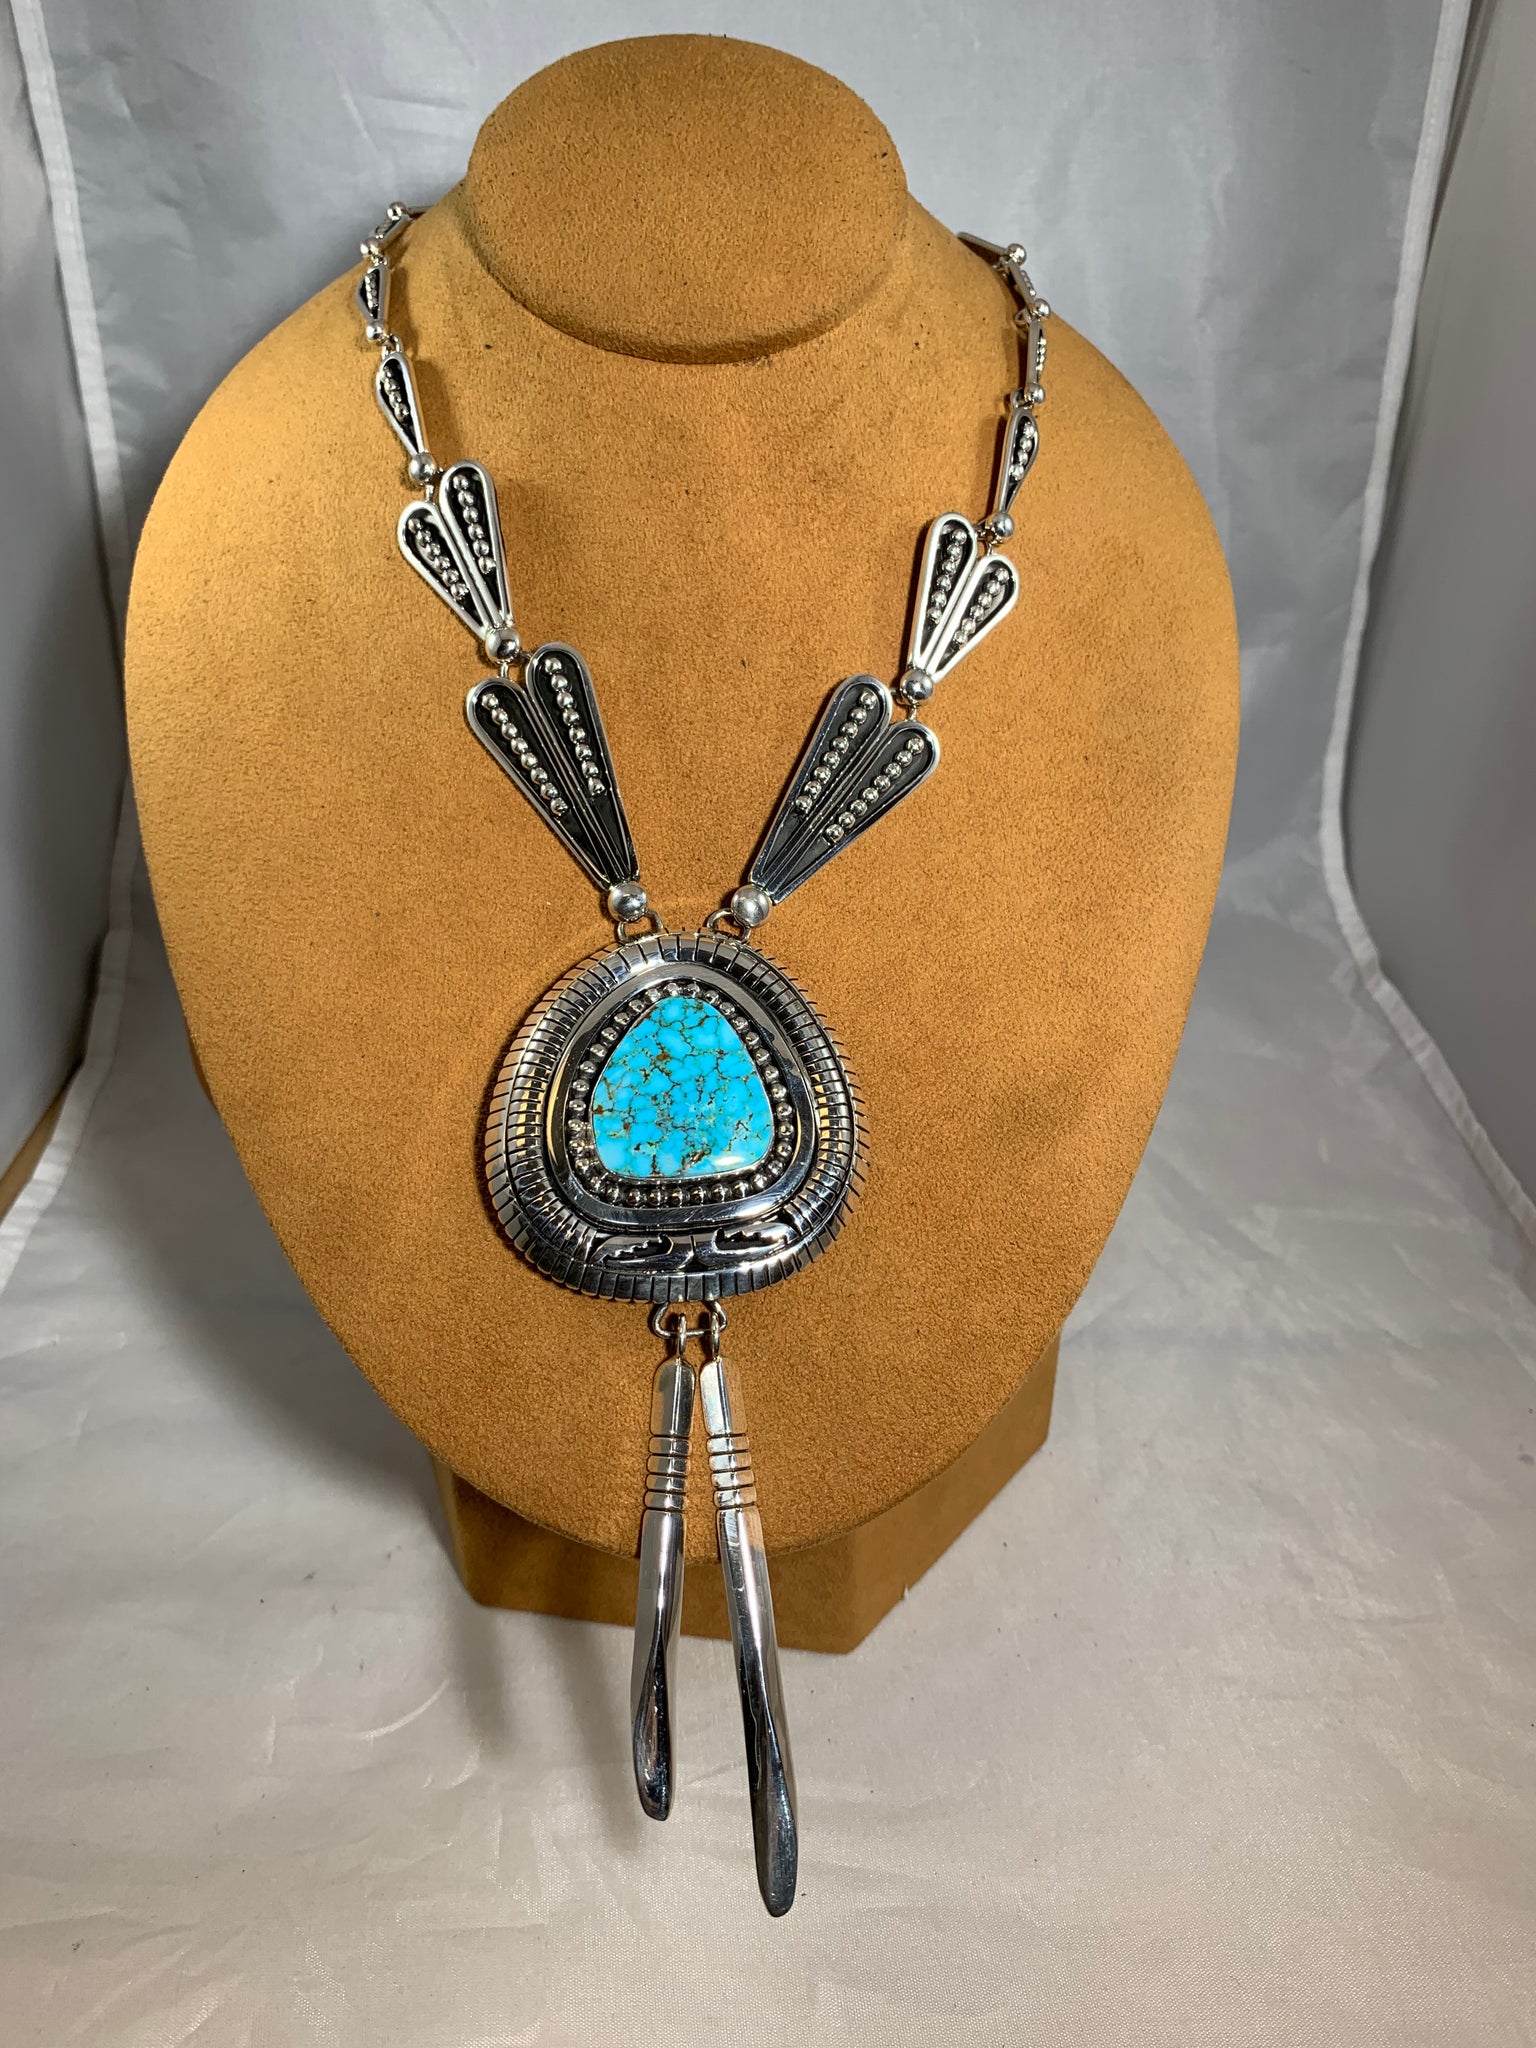 High Grade Blue Kingman Turquoise Necklace by Johnathan Nez